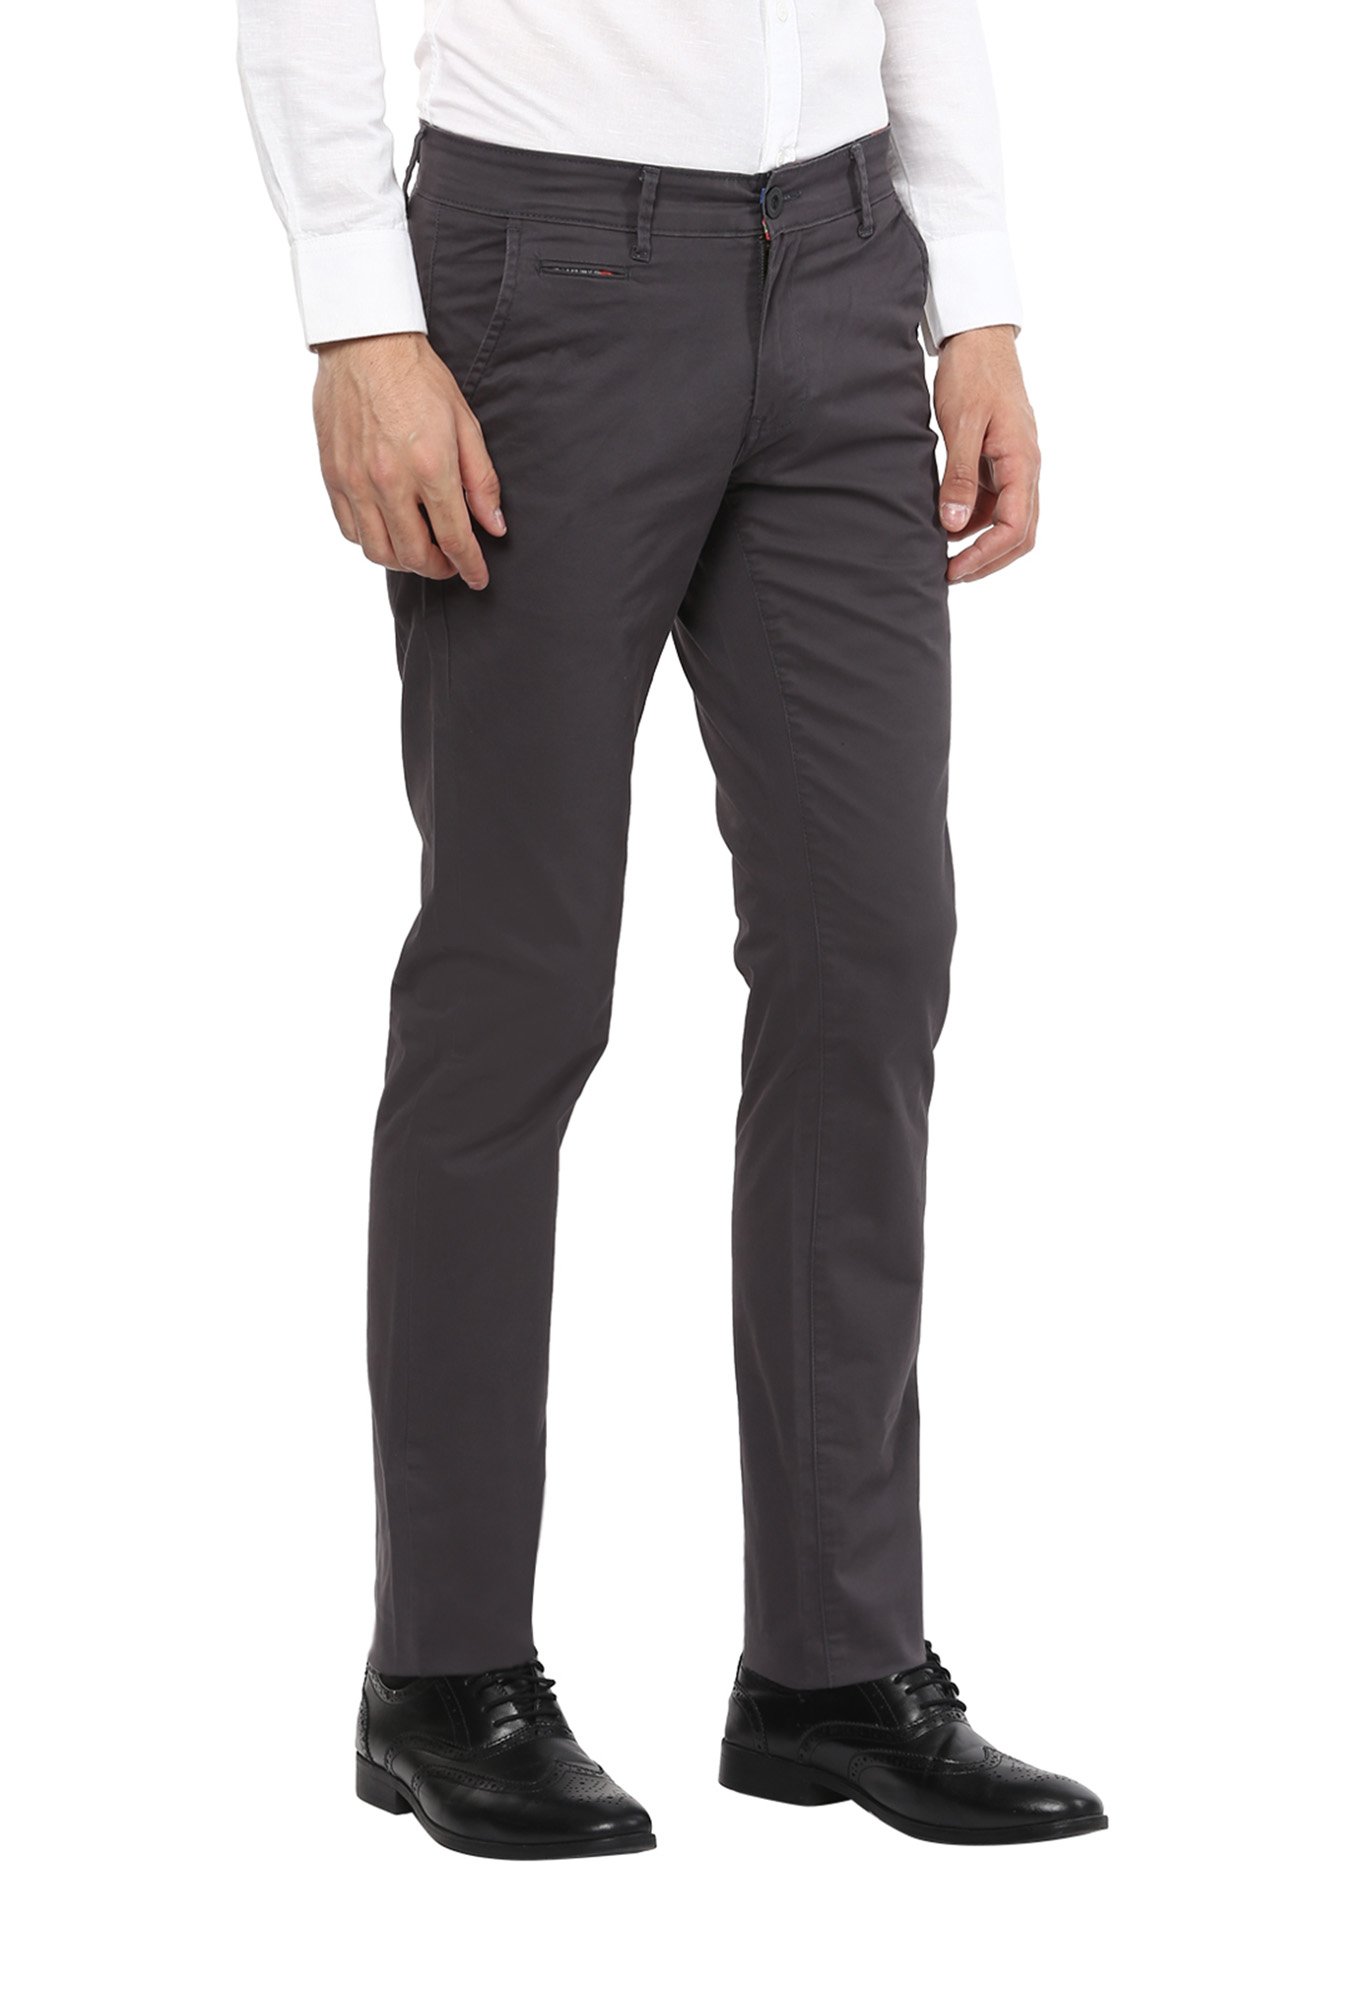 Mufti Grey Slim Fit Casual Trouser 36 in Vijayawada at best price by Mufti   Justdial